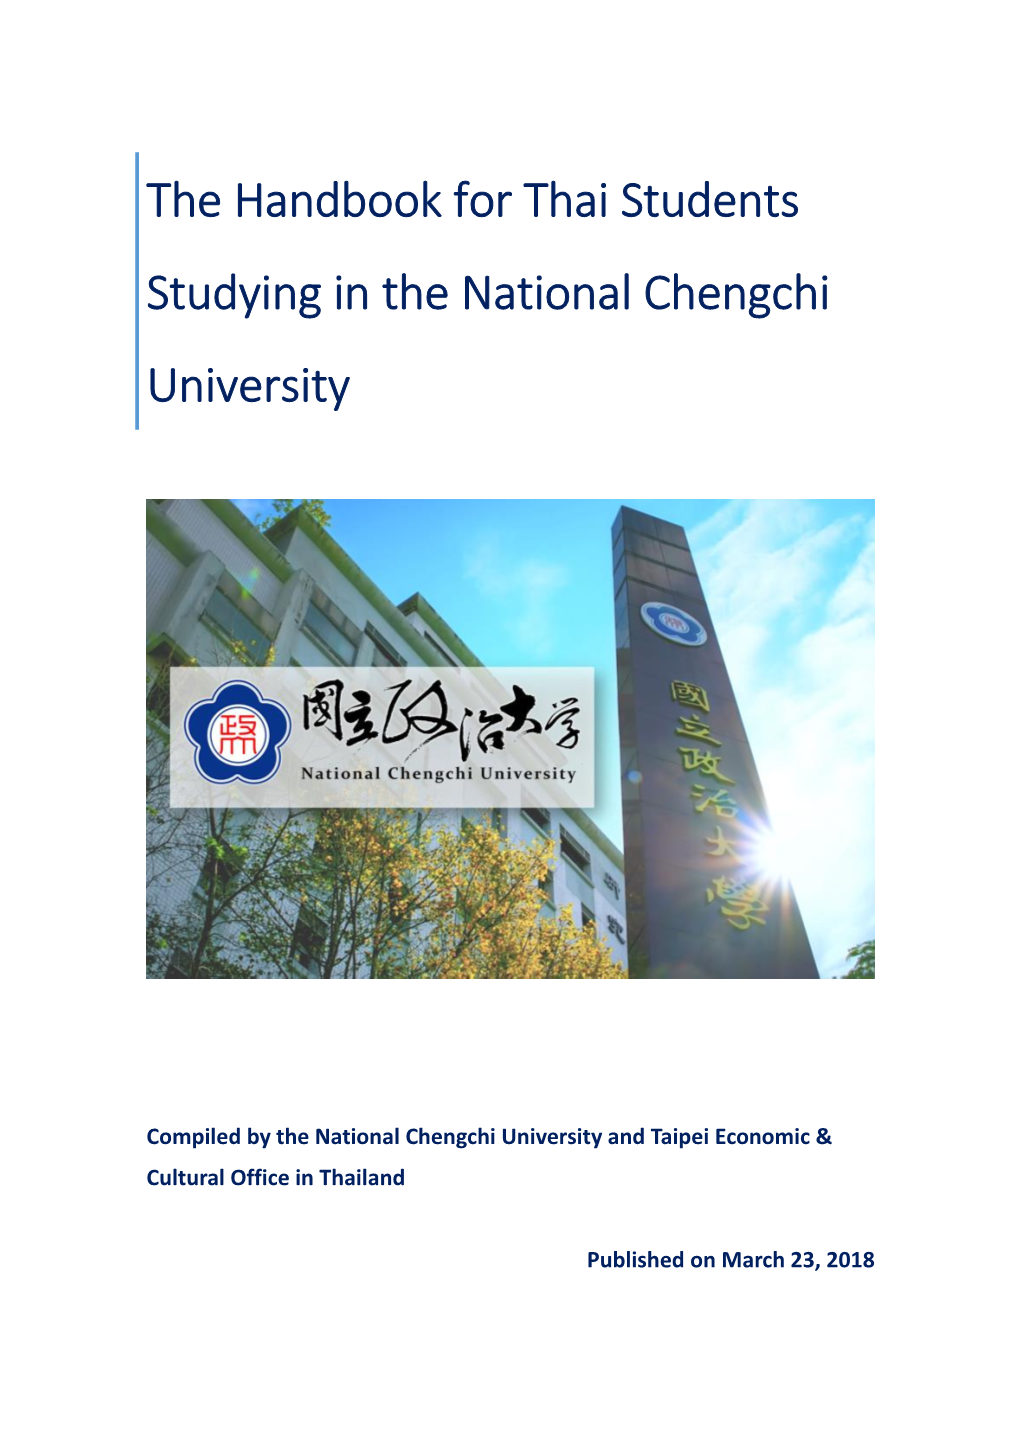 The Handbook for Thai Students Studying in the National Chengchi University